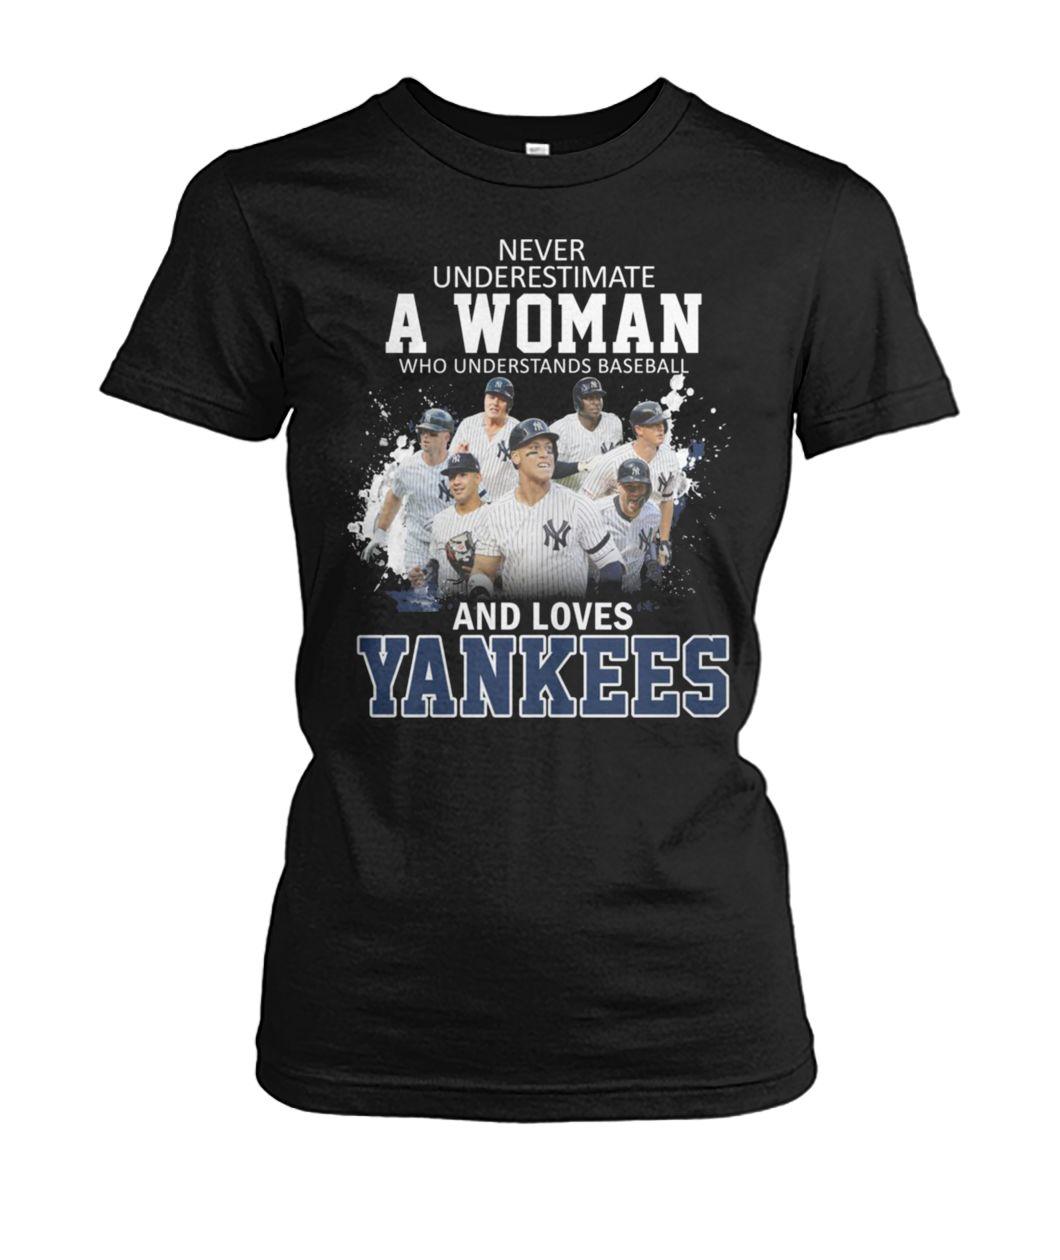 Never underestimate a woman who understands baseball and loves the yankees women's crew tee